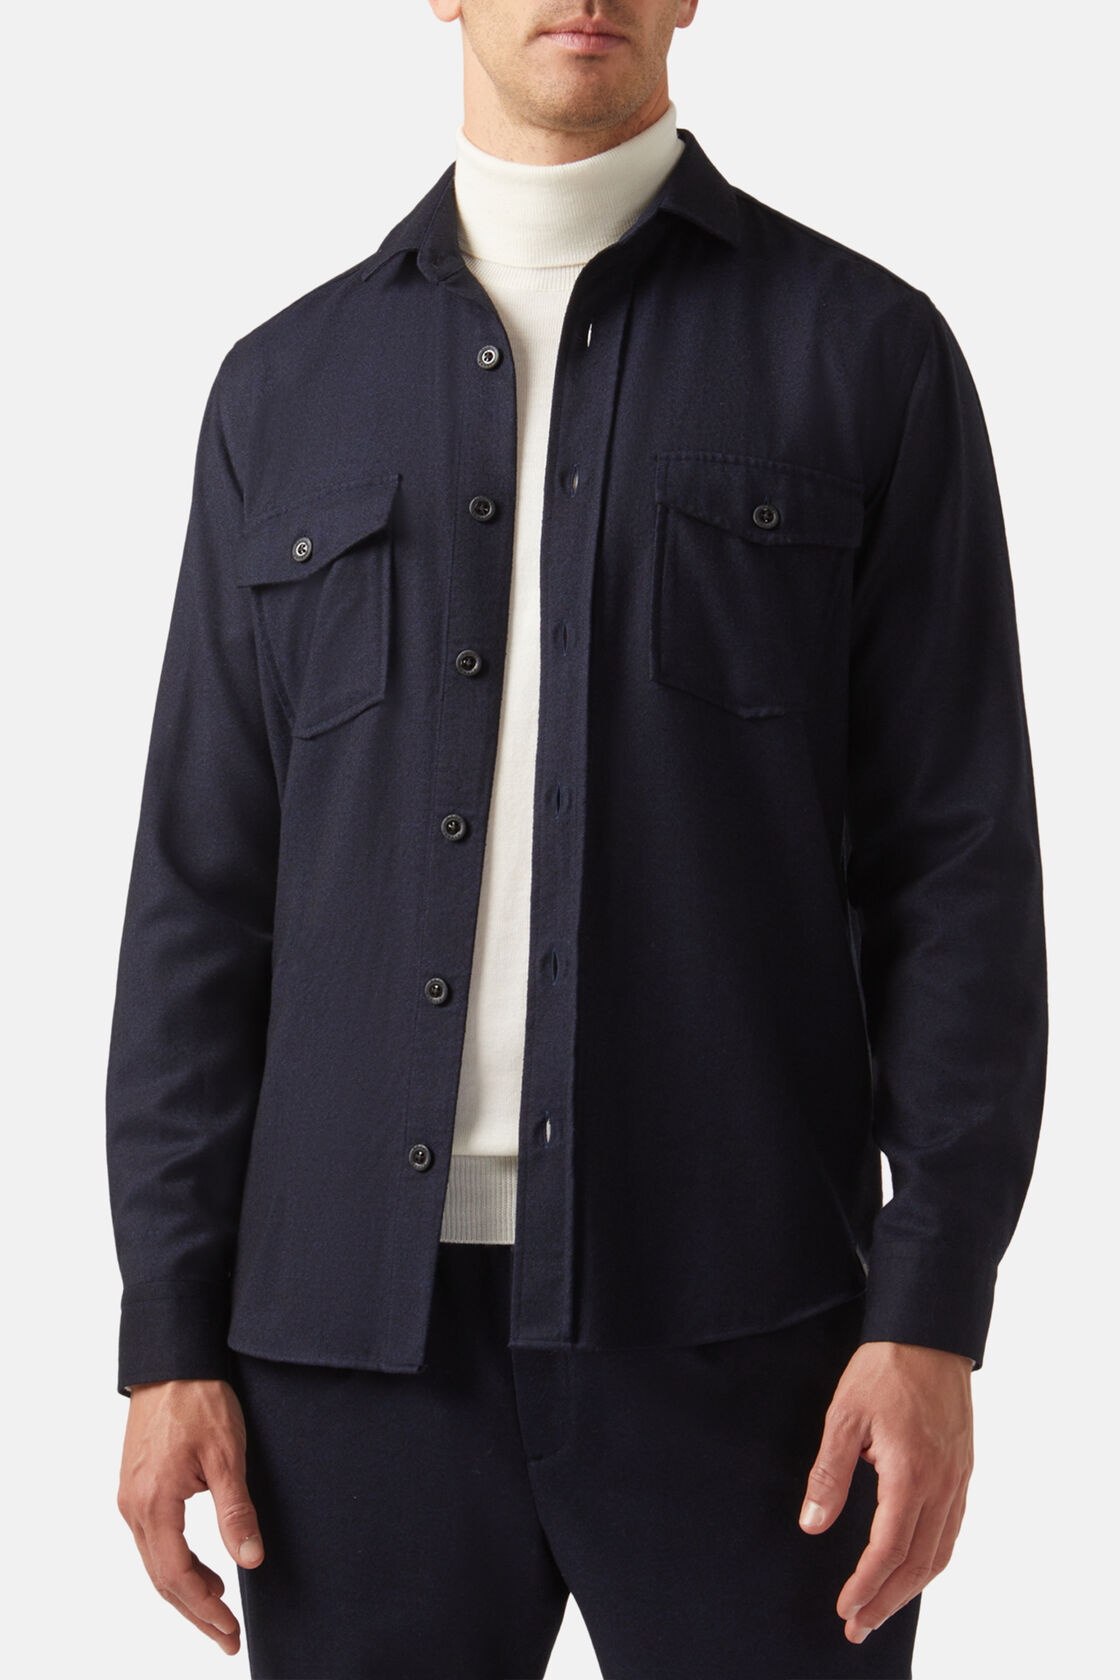 Navy Oversize Crossover Shirt In Flannel, Navy blue, hi-res